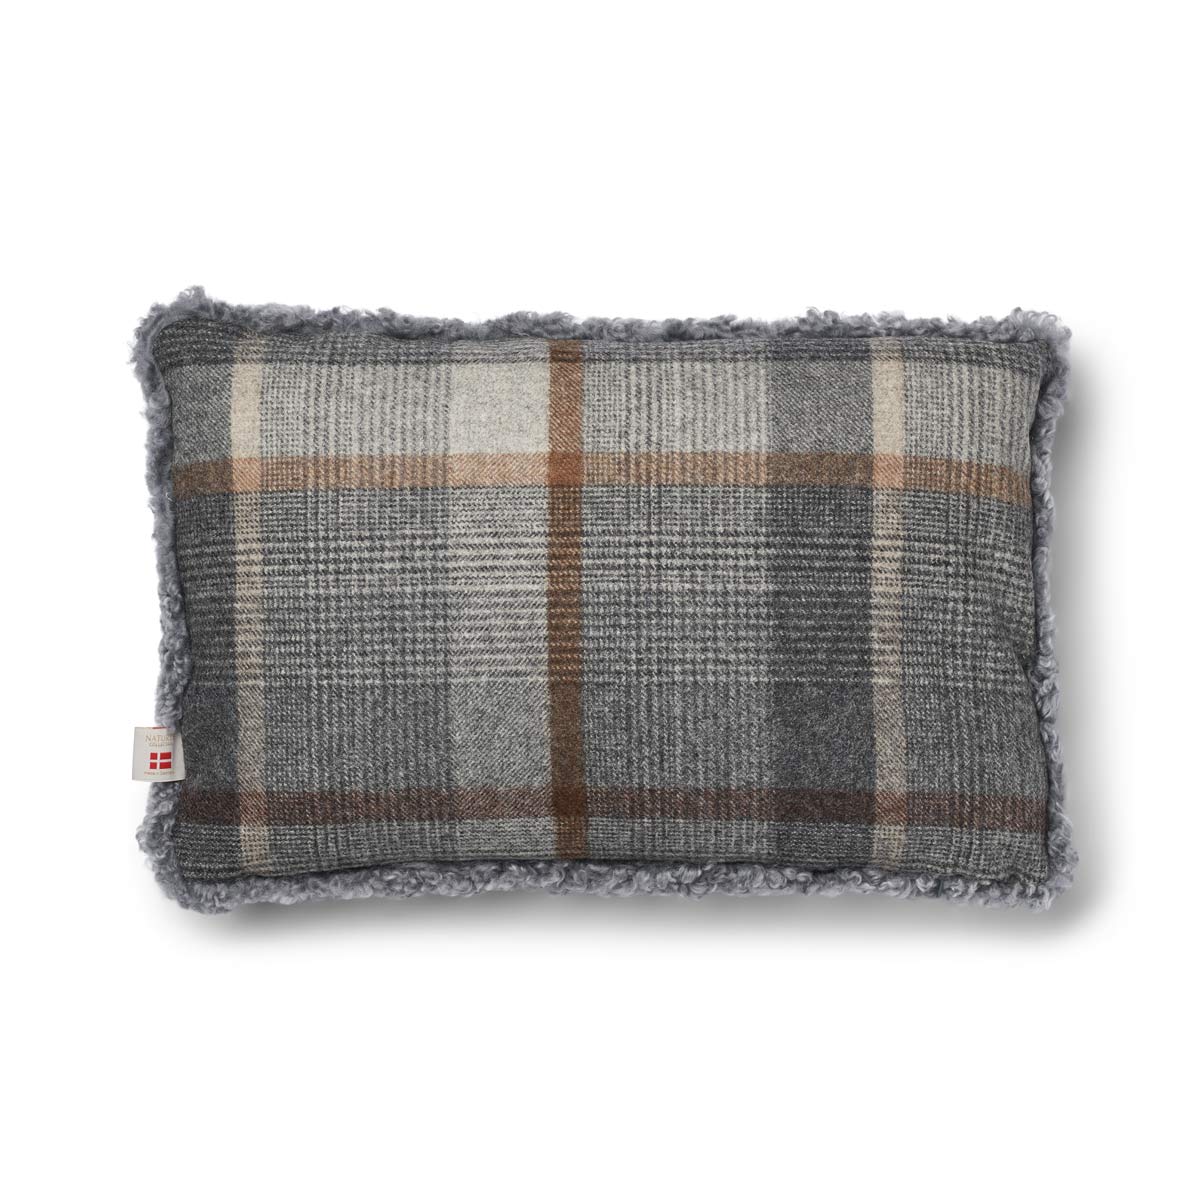 Checked Collection, Cushion One Side 100 % Wool, One Side SW New Zealand Sheepskin. Size: 34x52 cm.